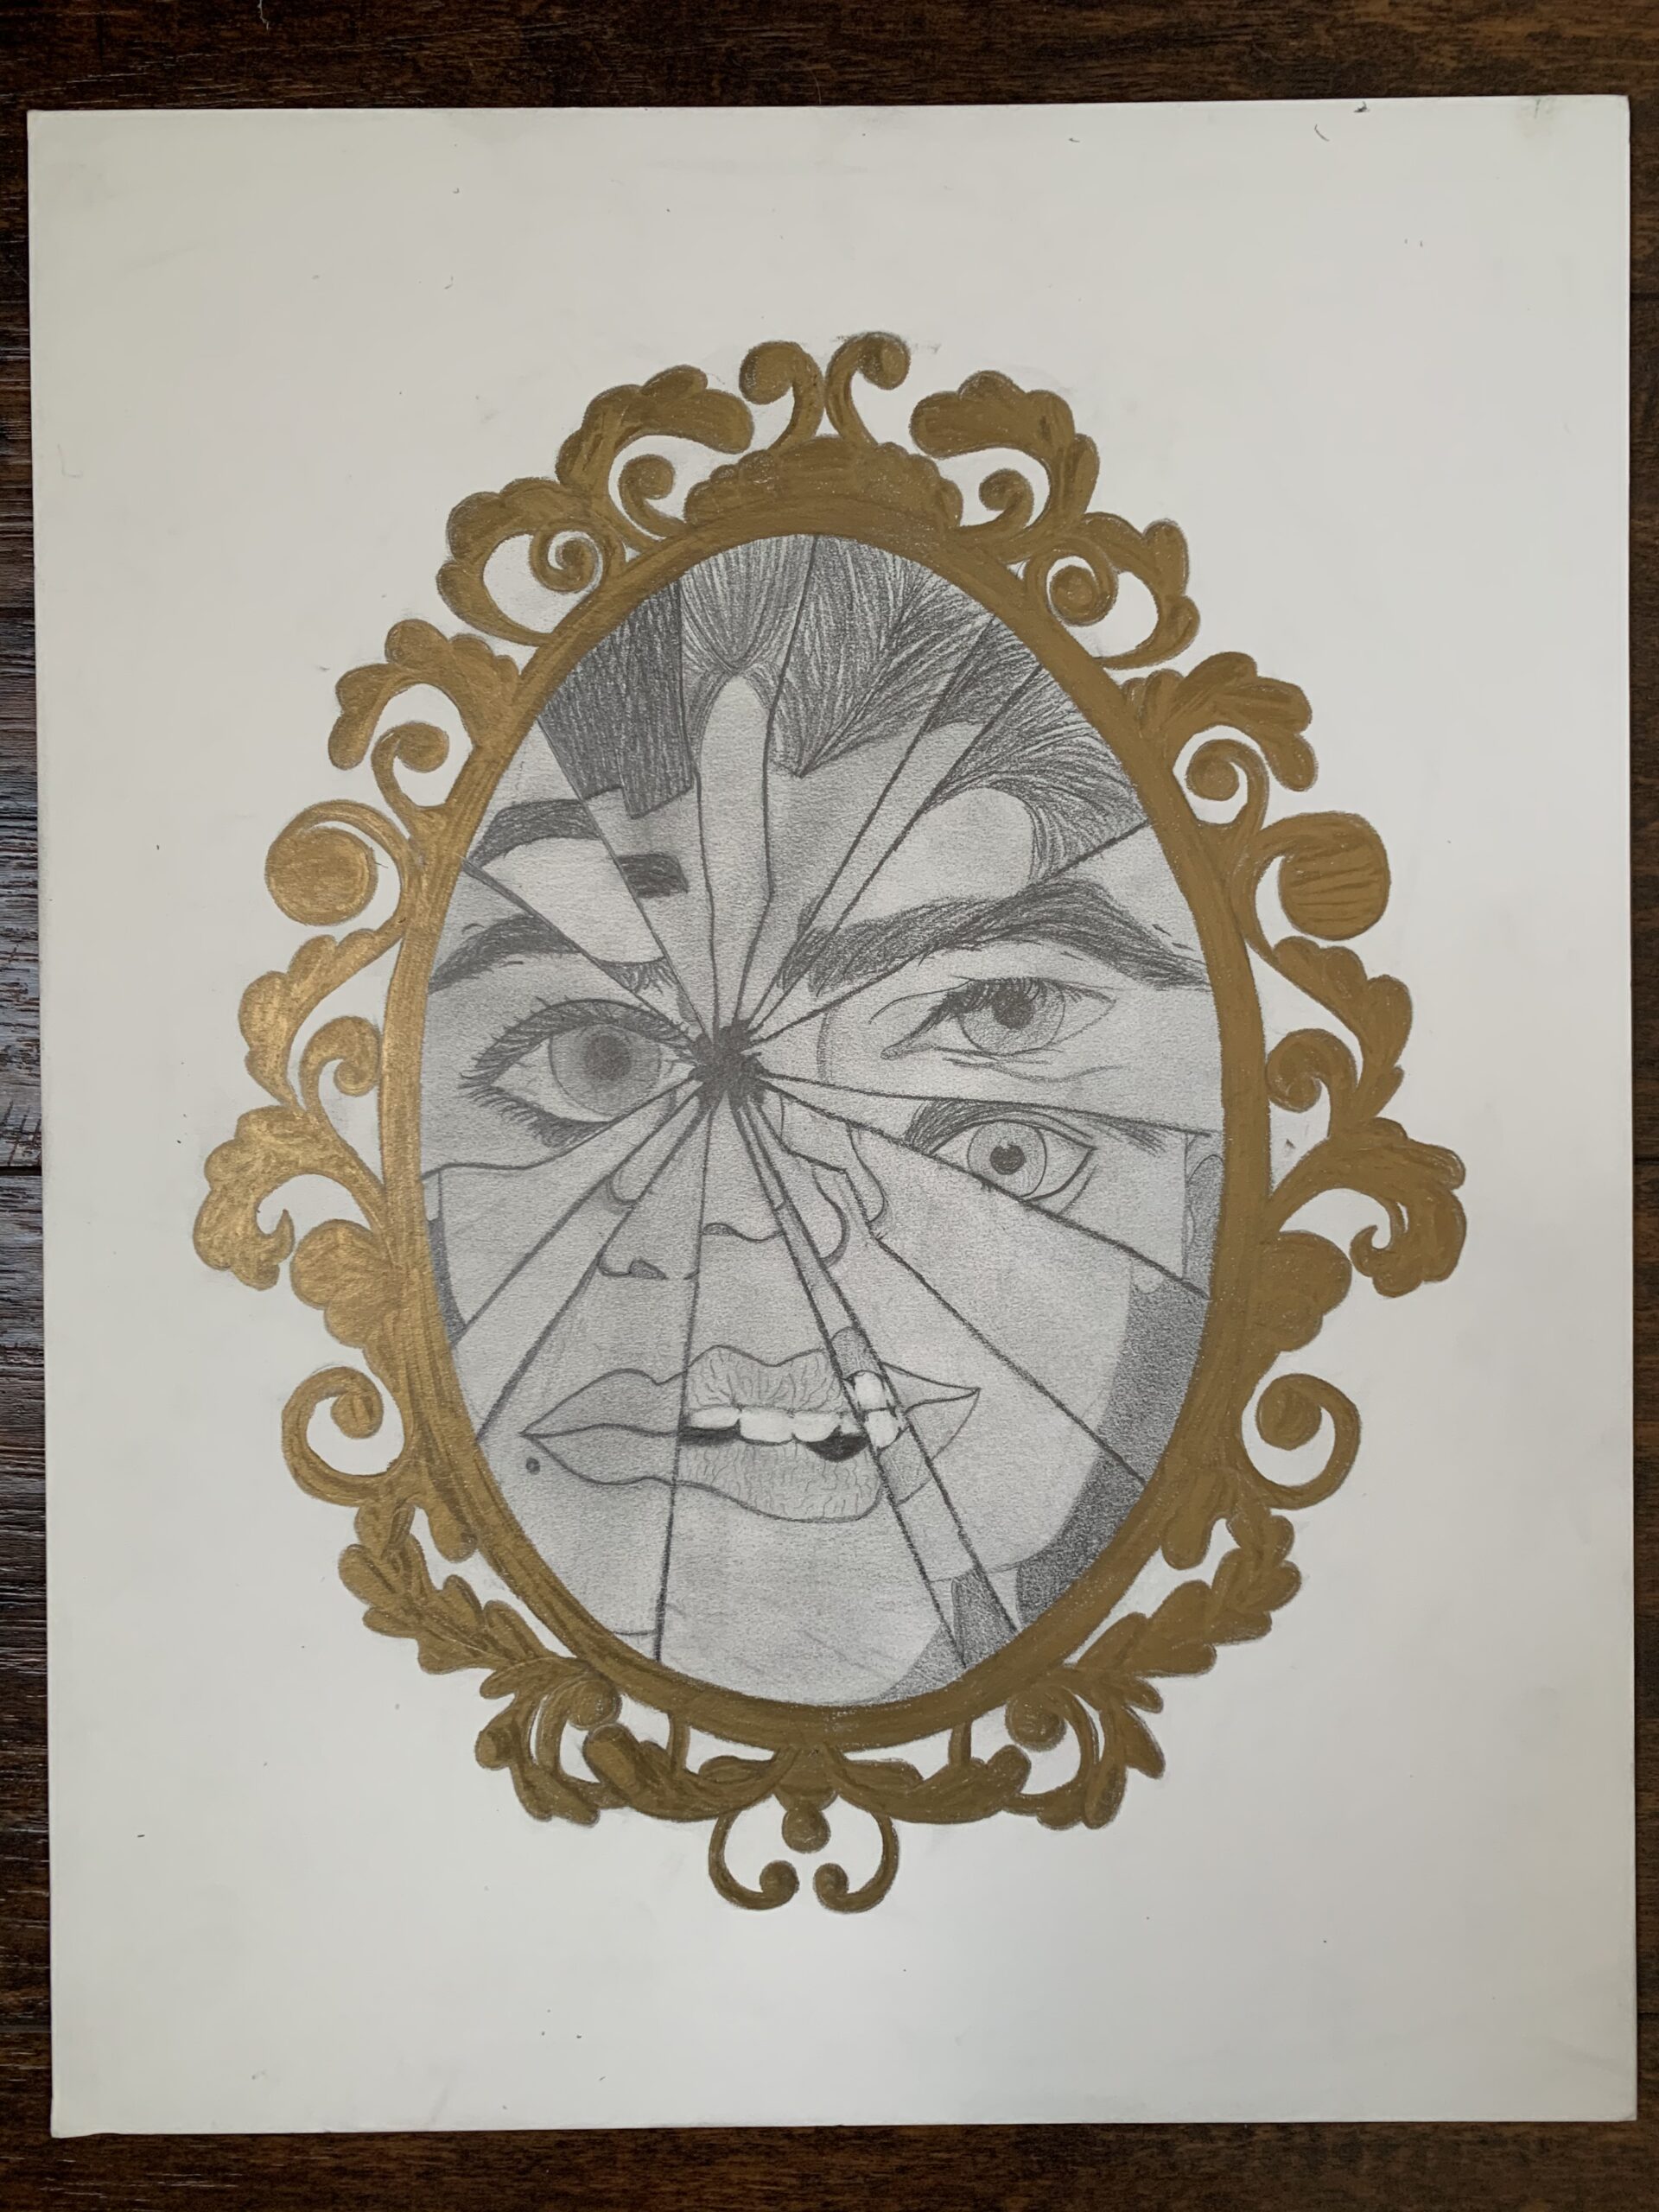 A hand drawn gold mirror that is shattered. In the reflective mirror you can see a face.